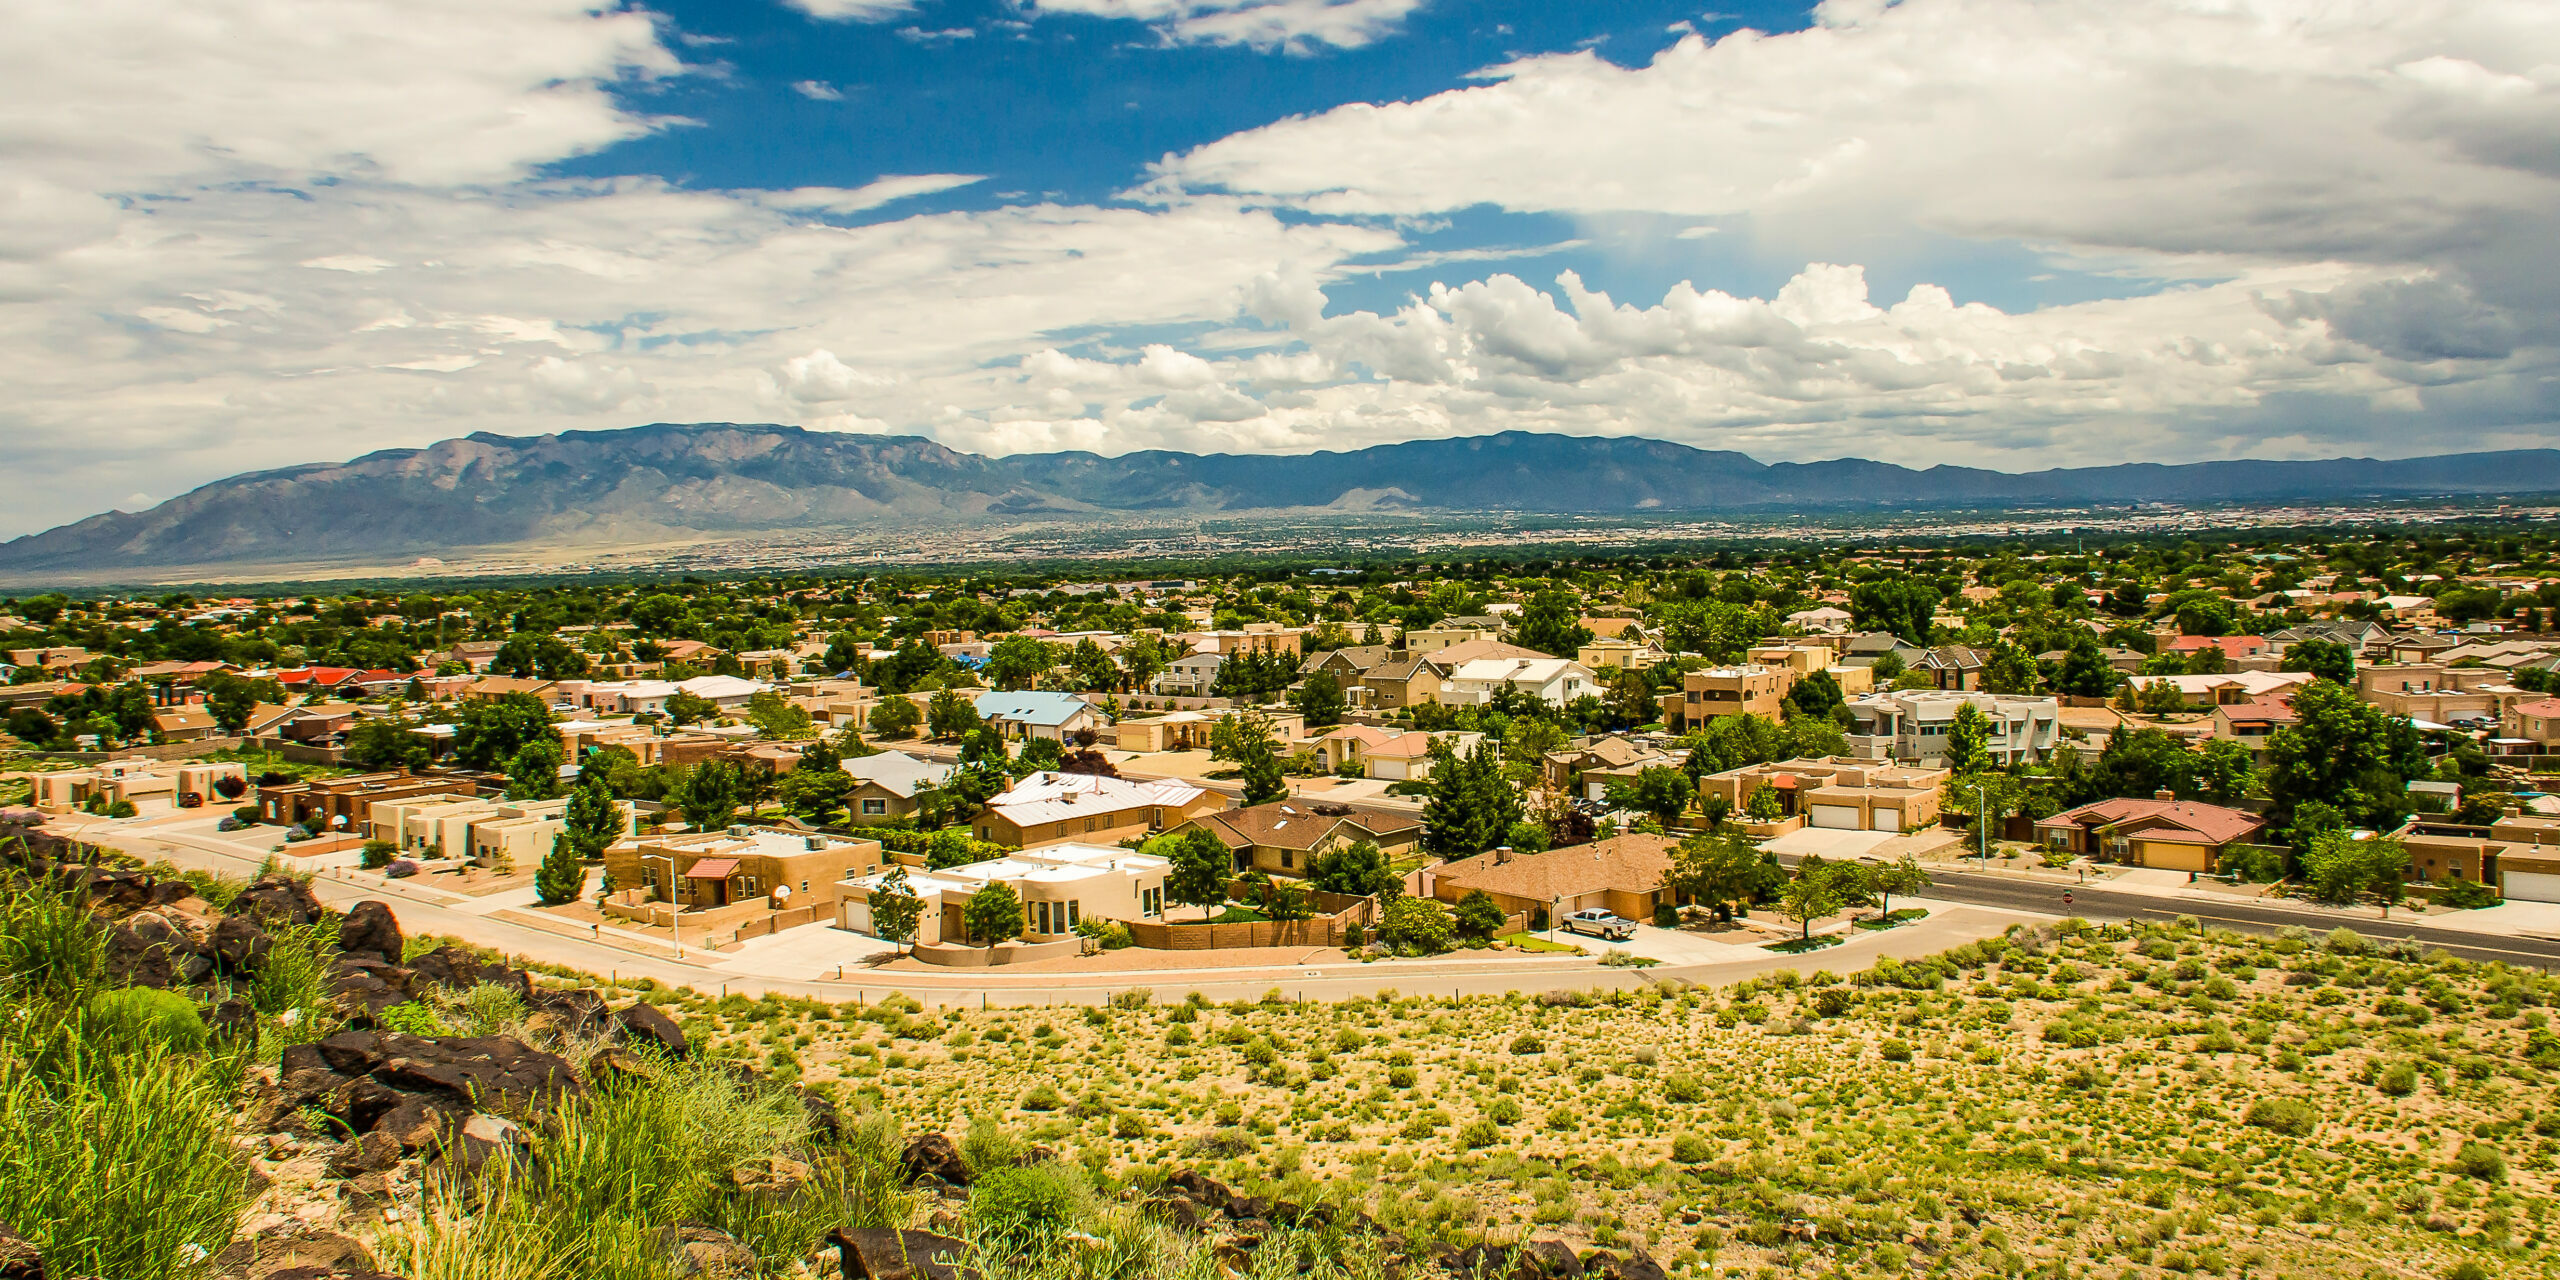 Albuquerque, USA - July 29, 2015: Skyline or cityscape of city with residential suburban houses near Petroglyph National Monument